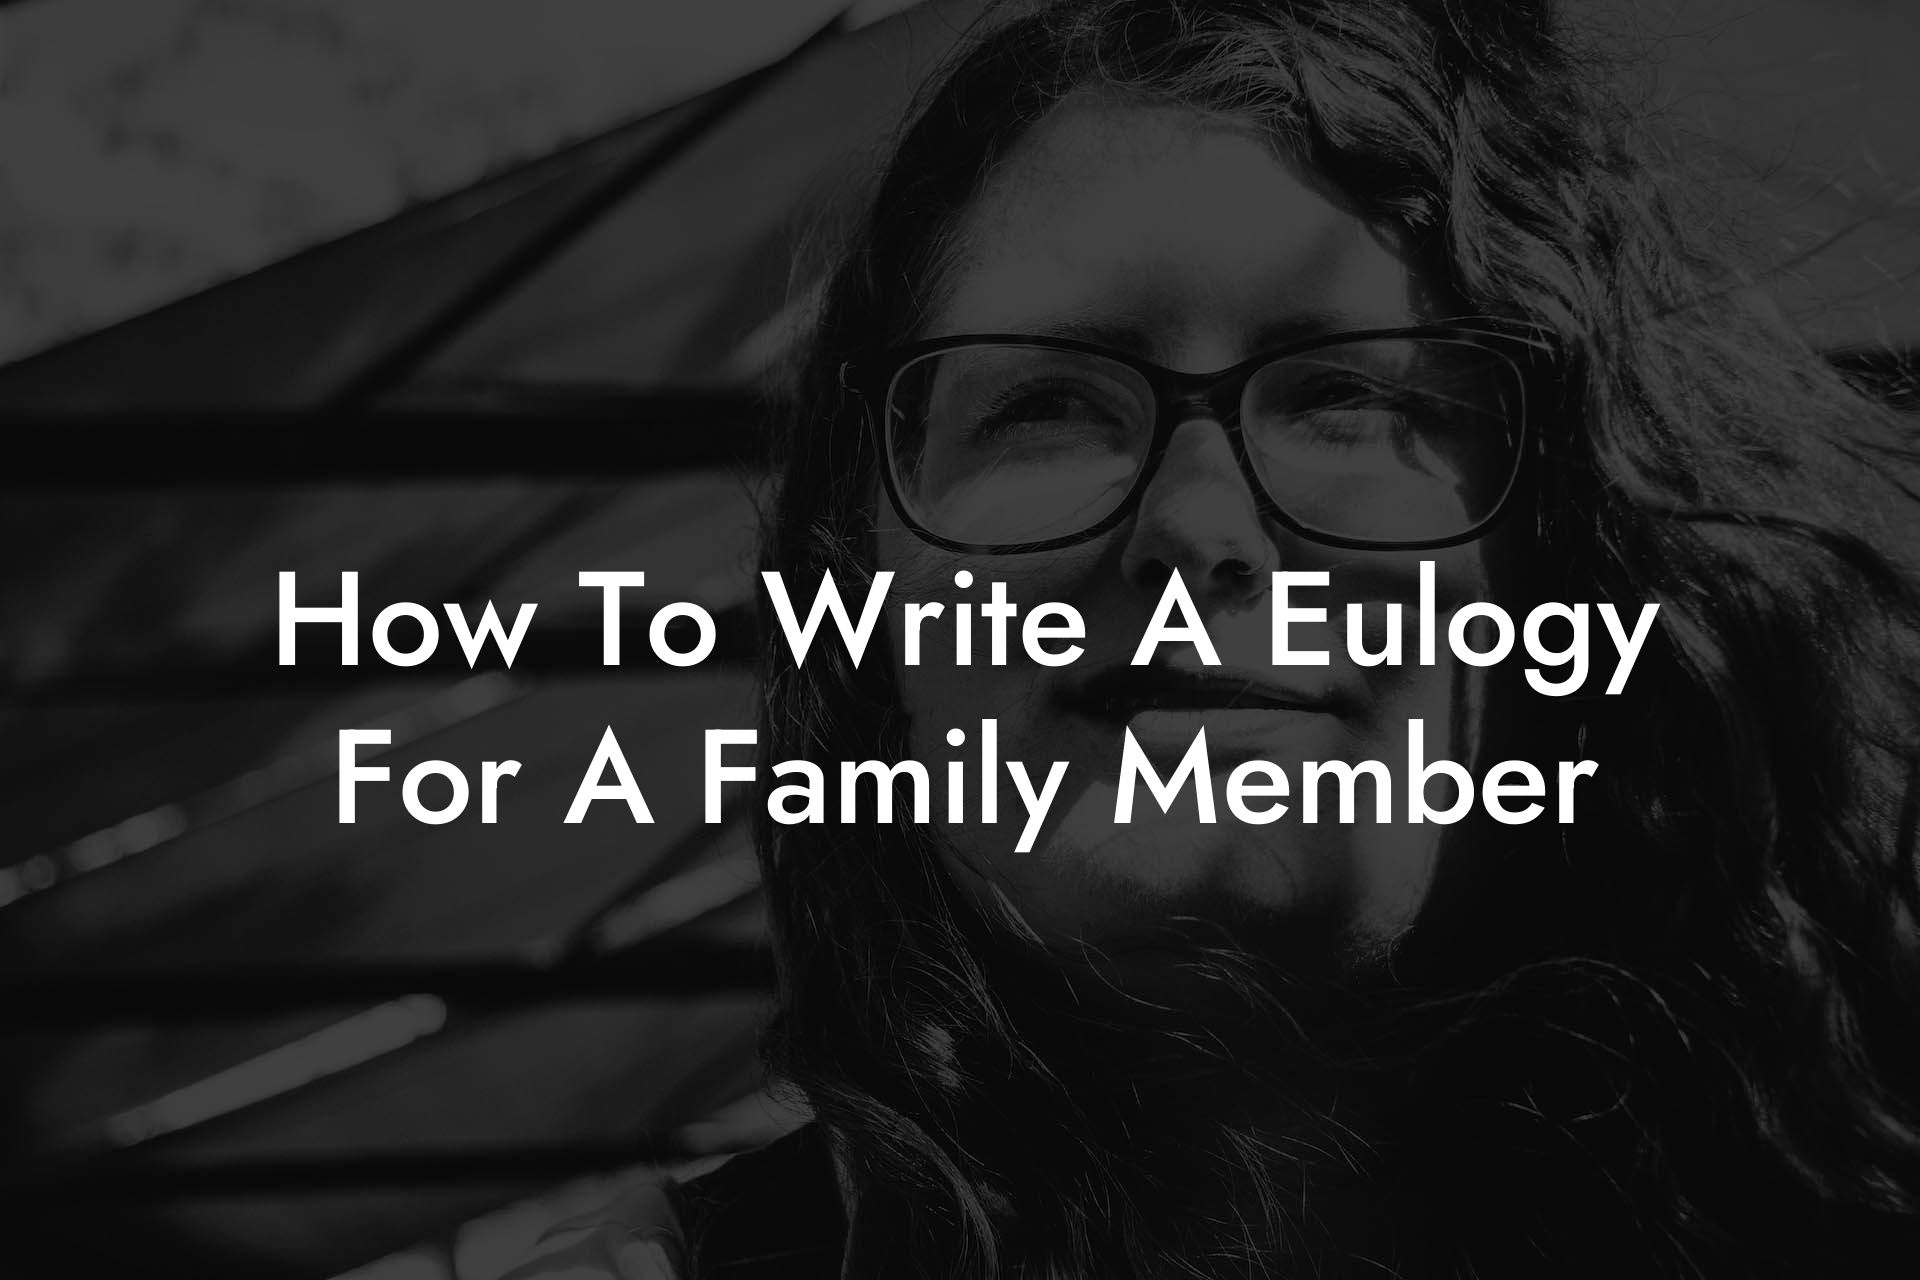 How To Write A Eulogy For A Family Member